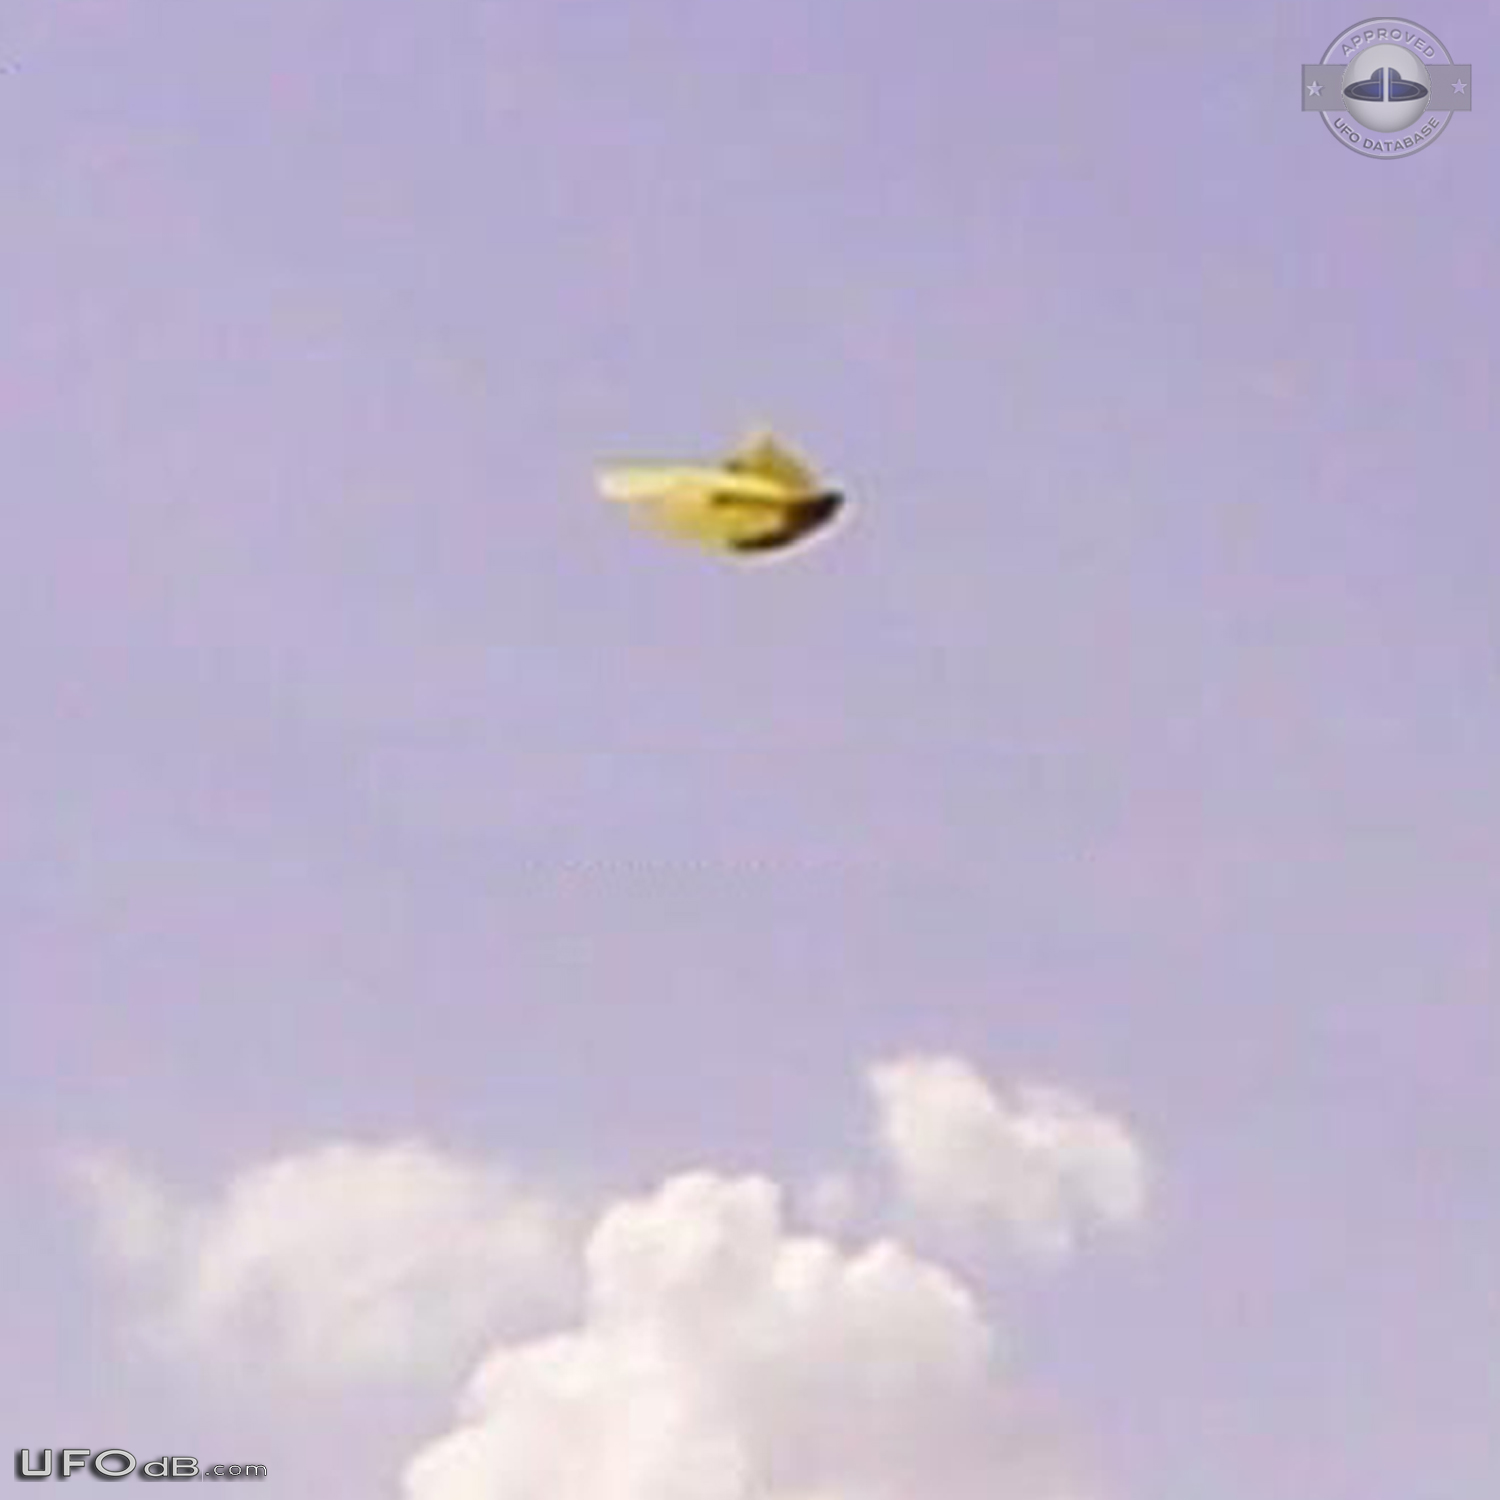 The witness stopped the car to take photos of Bahia Brazil Landscape 2 UFO Picture #709-3